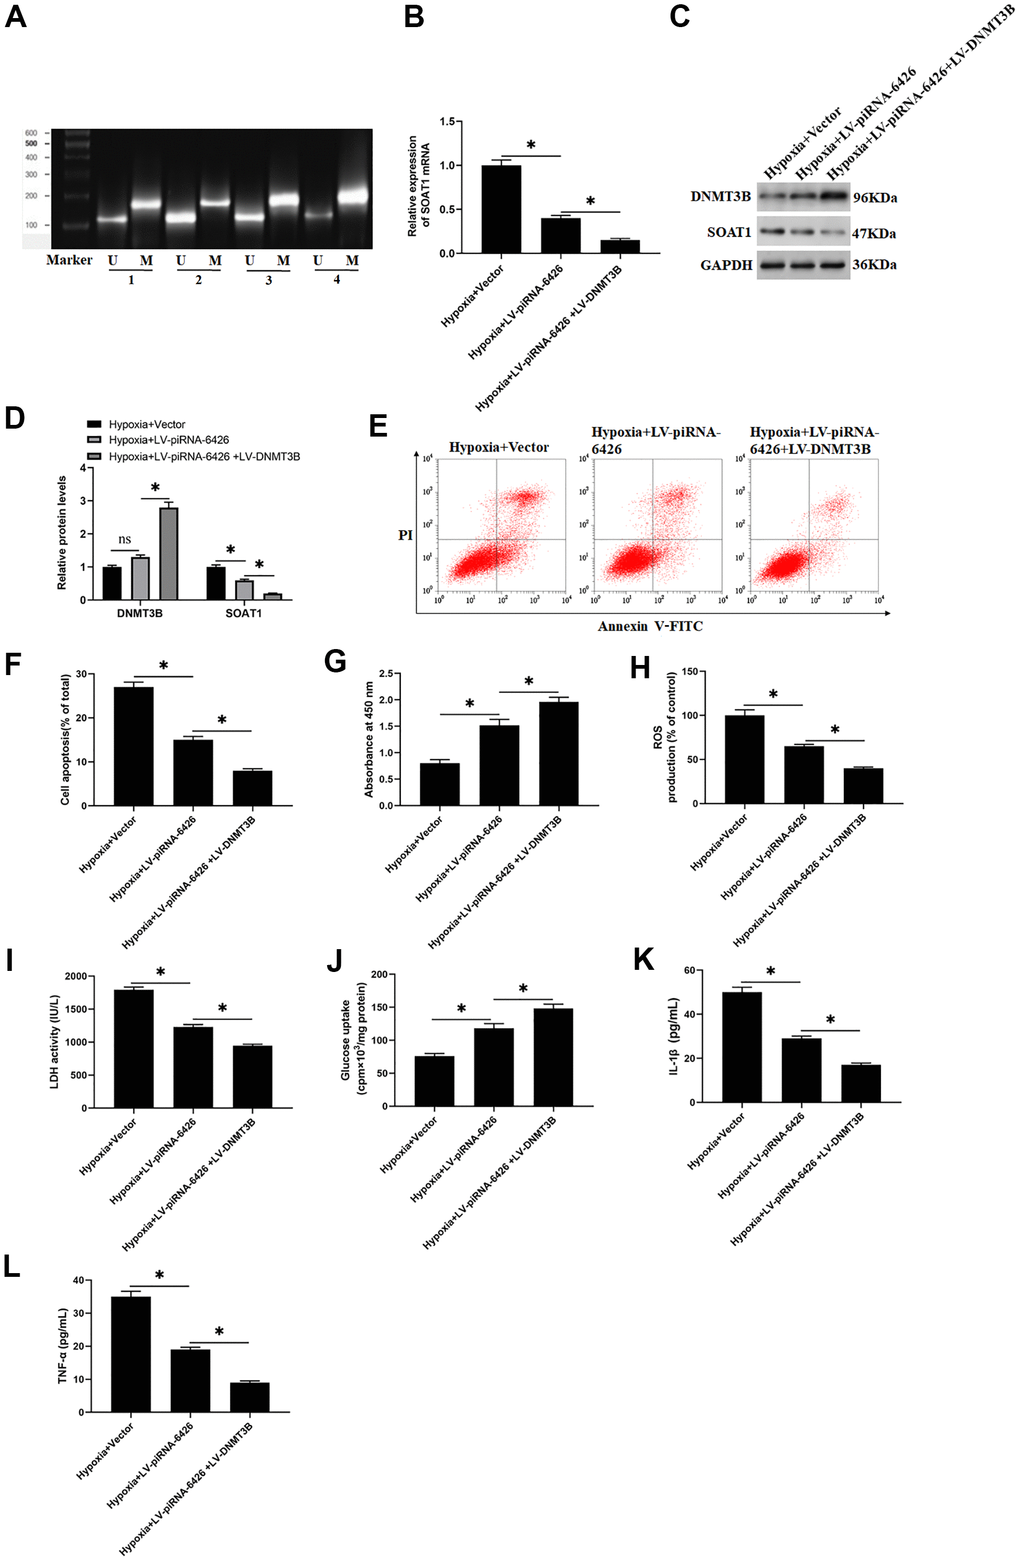 High methylation level of SOAT1 promoter alleviates hypoxia-induced dysfunction of rat cardiomyocytes. The cells were induced in a hypoxic incubator for 24 hours to establish a HF cell model after 48 h of per-incubation with LV-piRNA-6426 or together with LV-DNMT3B. (A) MSP assay was used to detect the methylation level of SOAT1 promoter. (B) RT-qPCR assay was used to detect the expression level of SOAT1 mRNA. (C, D) Western blotting was used to detect the expression levels of SOAT1 and DNMT3B proteins. (E, F) Flow cytometry was used to detect cell apoptosis. (G) MTT assay was used to identify cell viability. (H) The production of ROS was analyzed with DCFH-DA. (I) The LDH activity was detected with an ELISA kit. (J) D-(2-3H)-glucose uptake assay was used to perform glucose uptake on fully fused rat cardiomyocytes. (K, L) ELISA kits were used to detect the secretion of IL-1β and TNF-α. Values were expressed as mean ± SEM. ns P>0.05, *PP